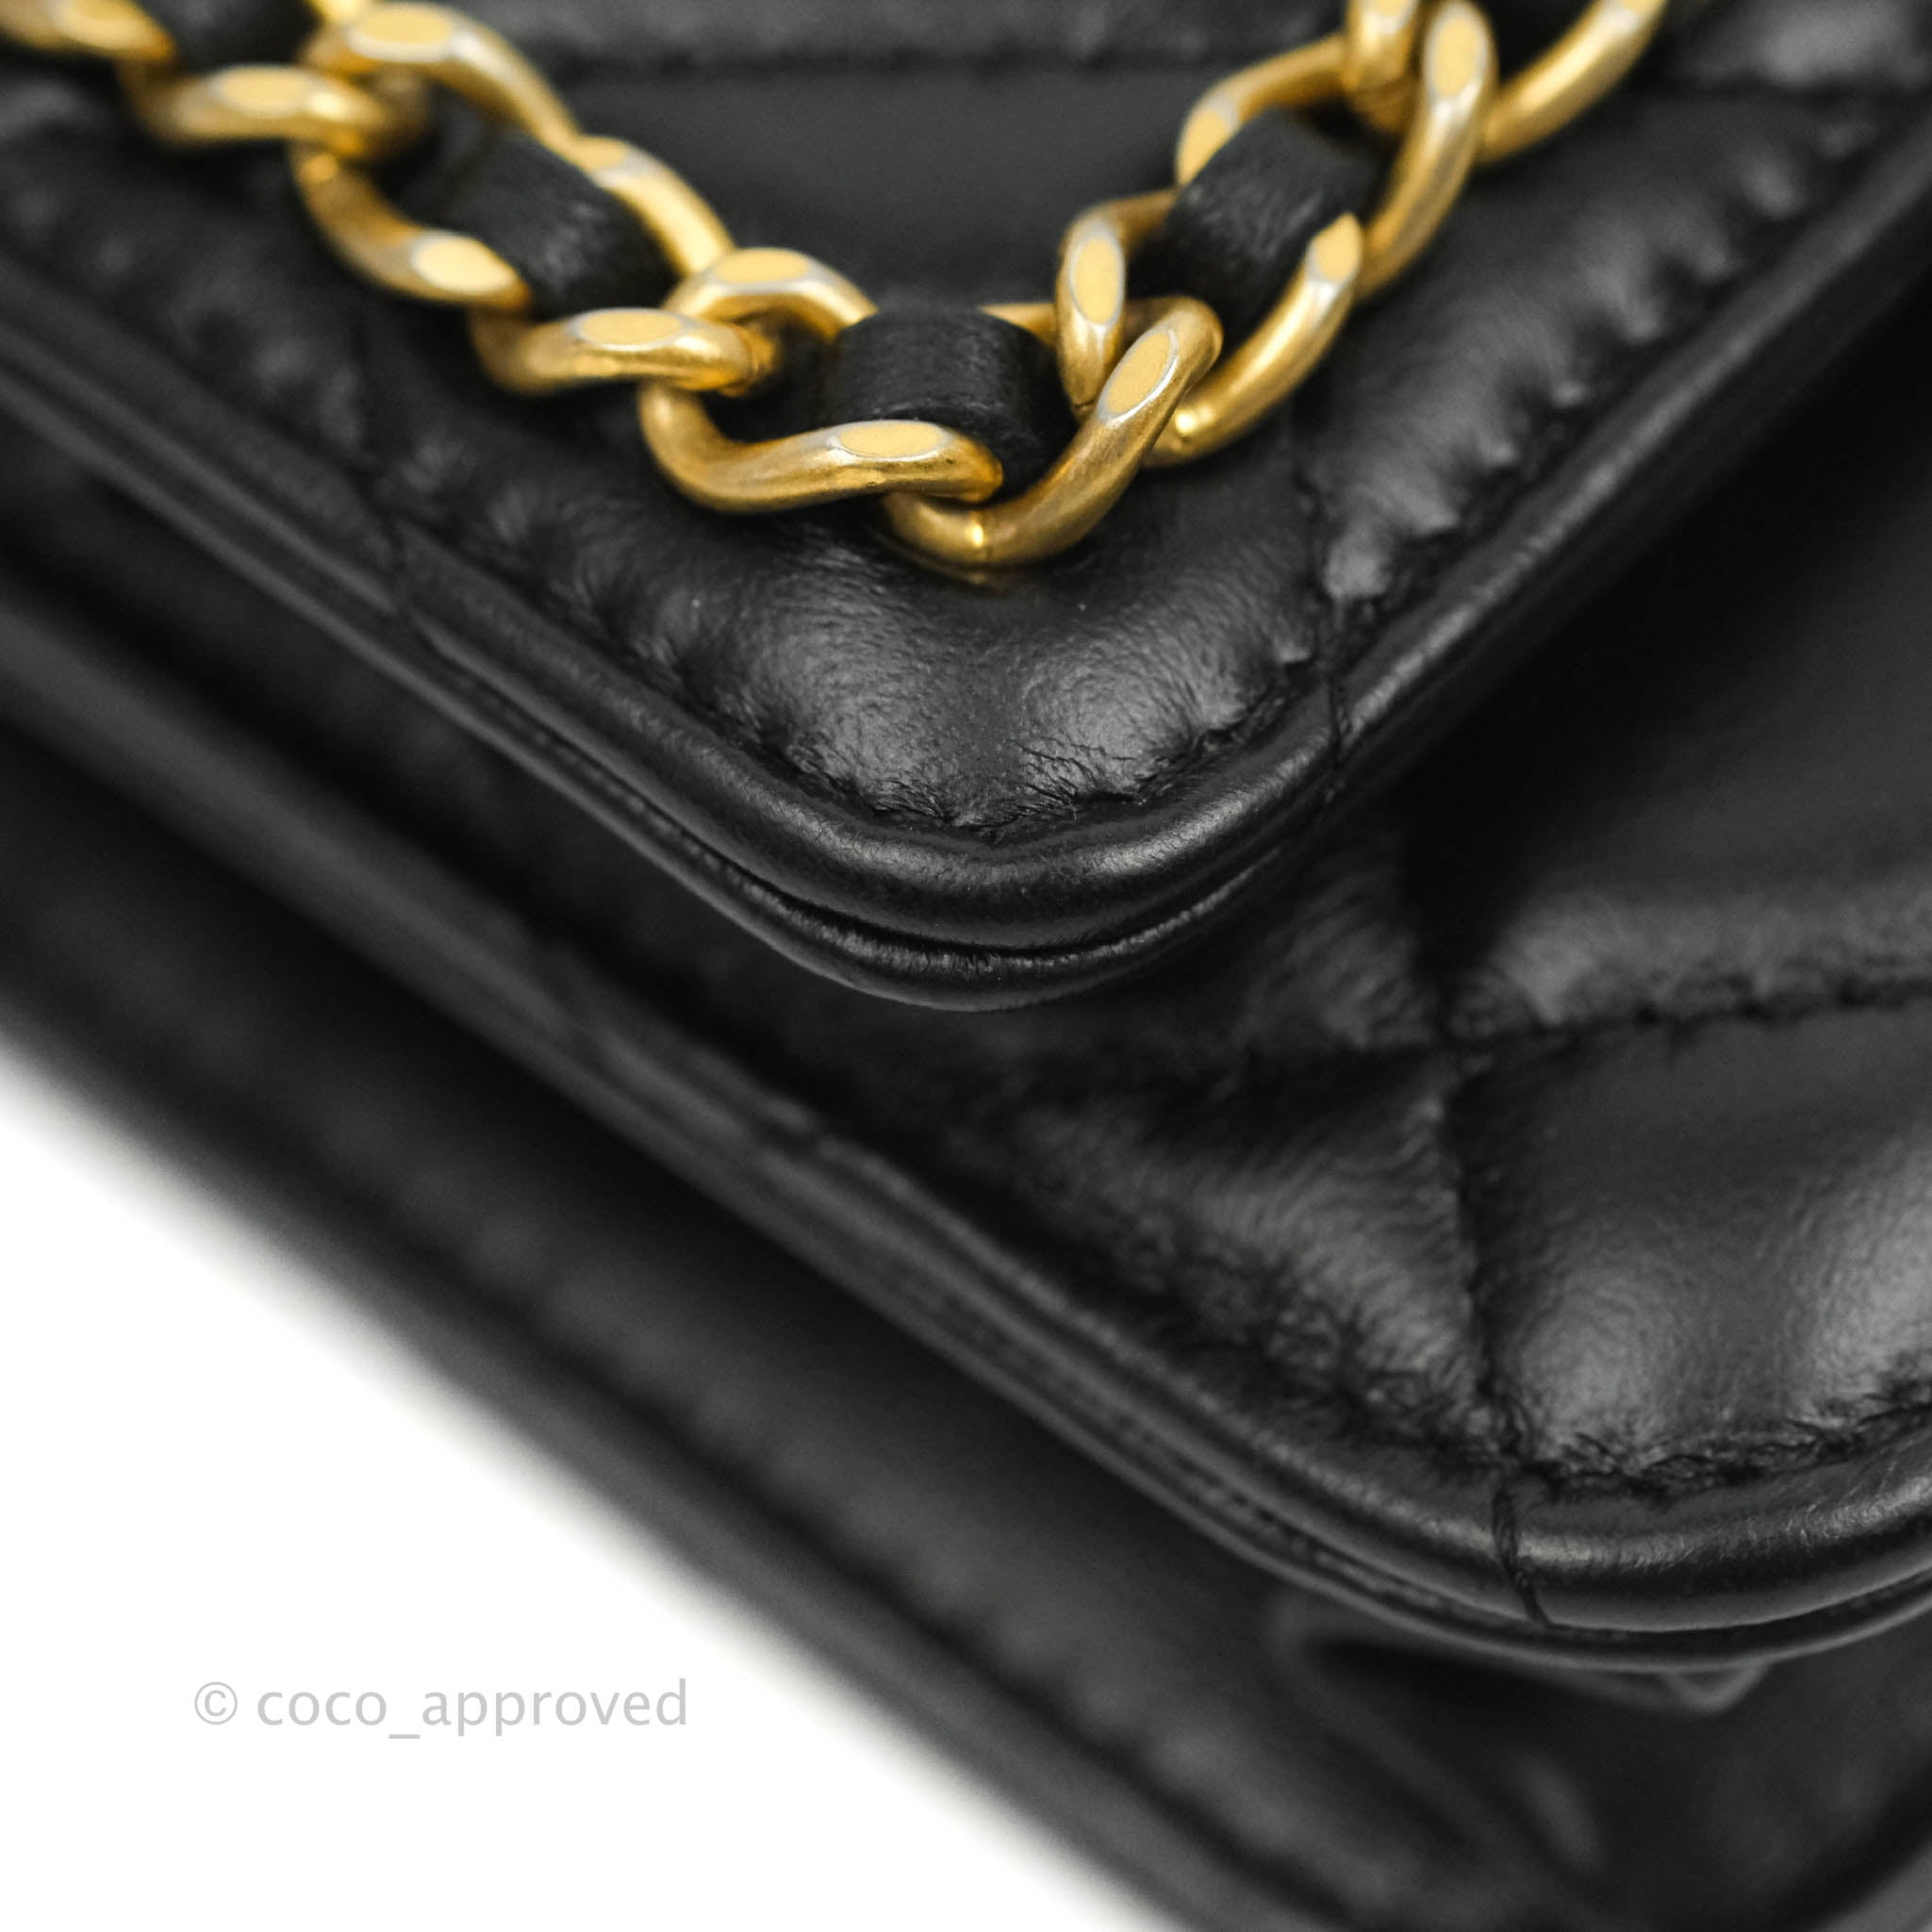 CHANEL Quilted Chain Around Pouch Black 1297465